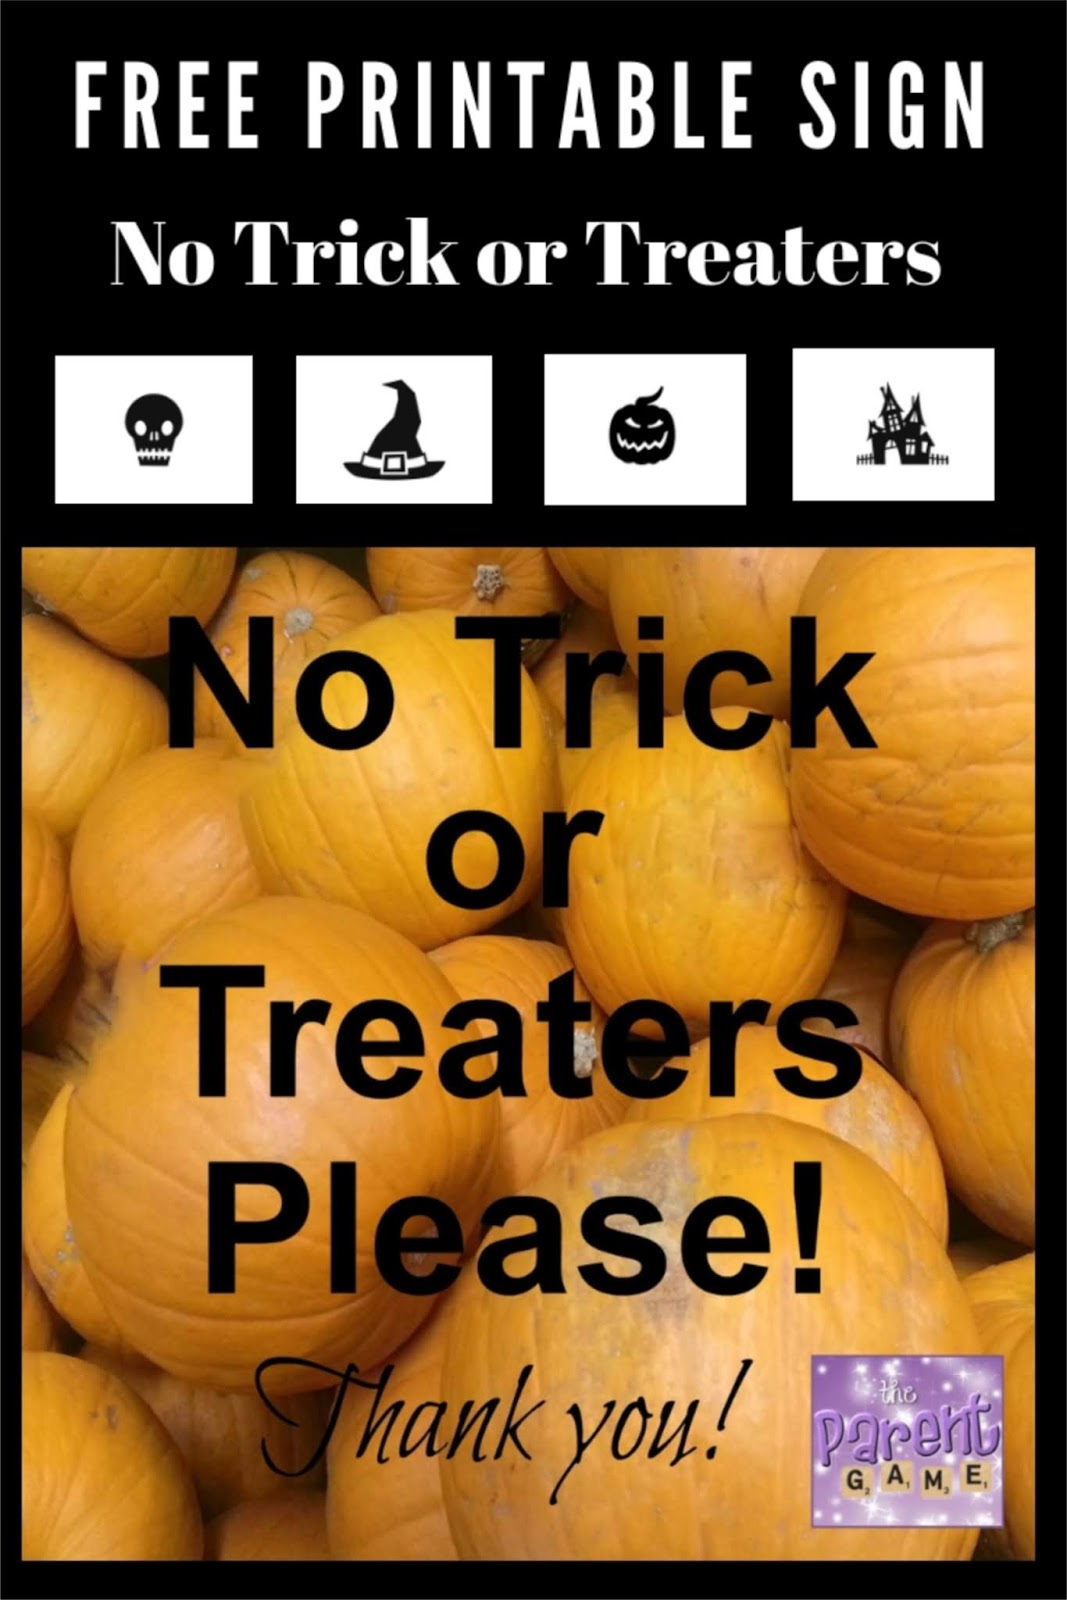 free-printable-no-trick-or-treaters-sign-the-parent-game